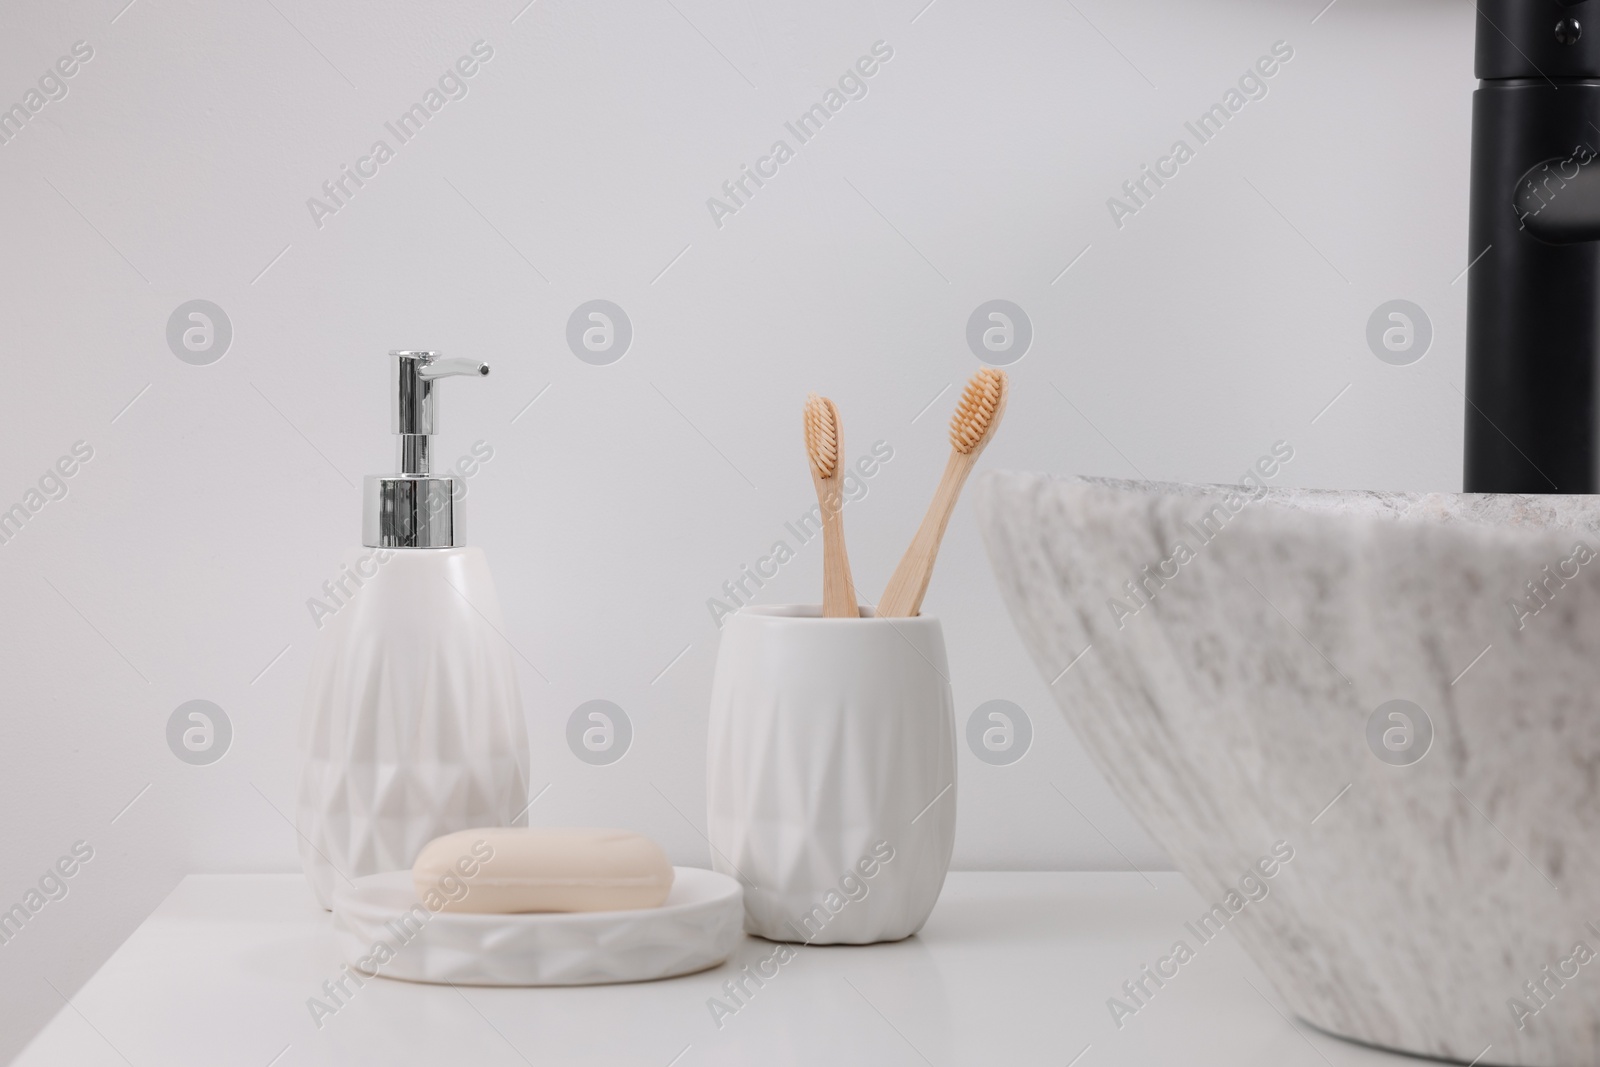 Photo of Different bath accessories and personal care products on white countertop in bathroom